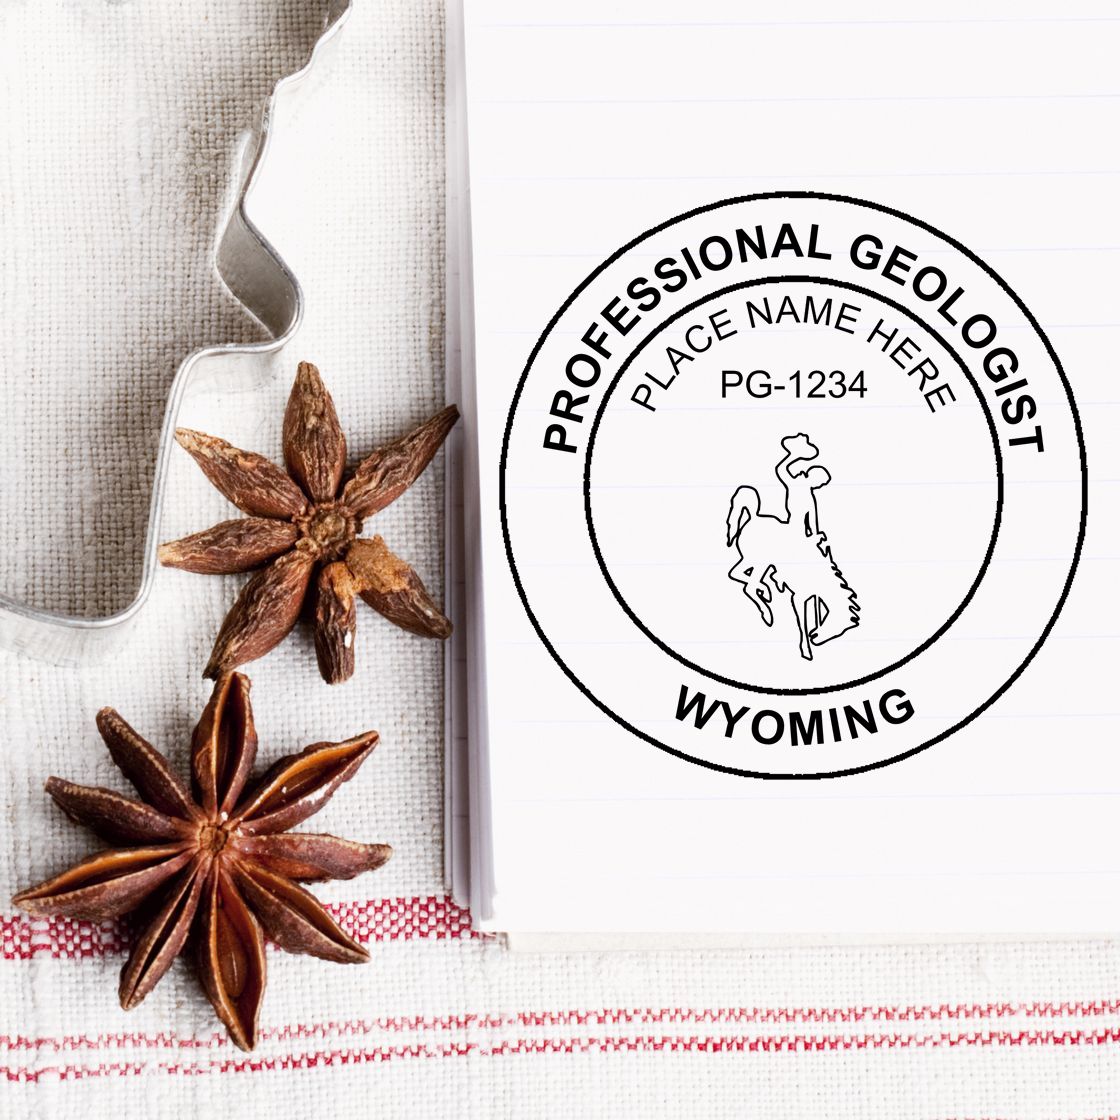 The main image for the Slim Pre-Inked Wyoming Professional Geologist Seal Stamp depicting a sample of the imprint and imprint sample